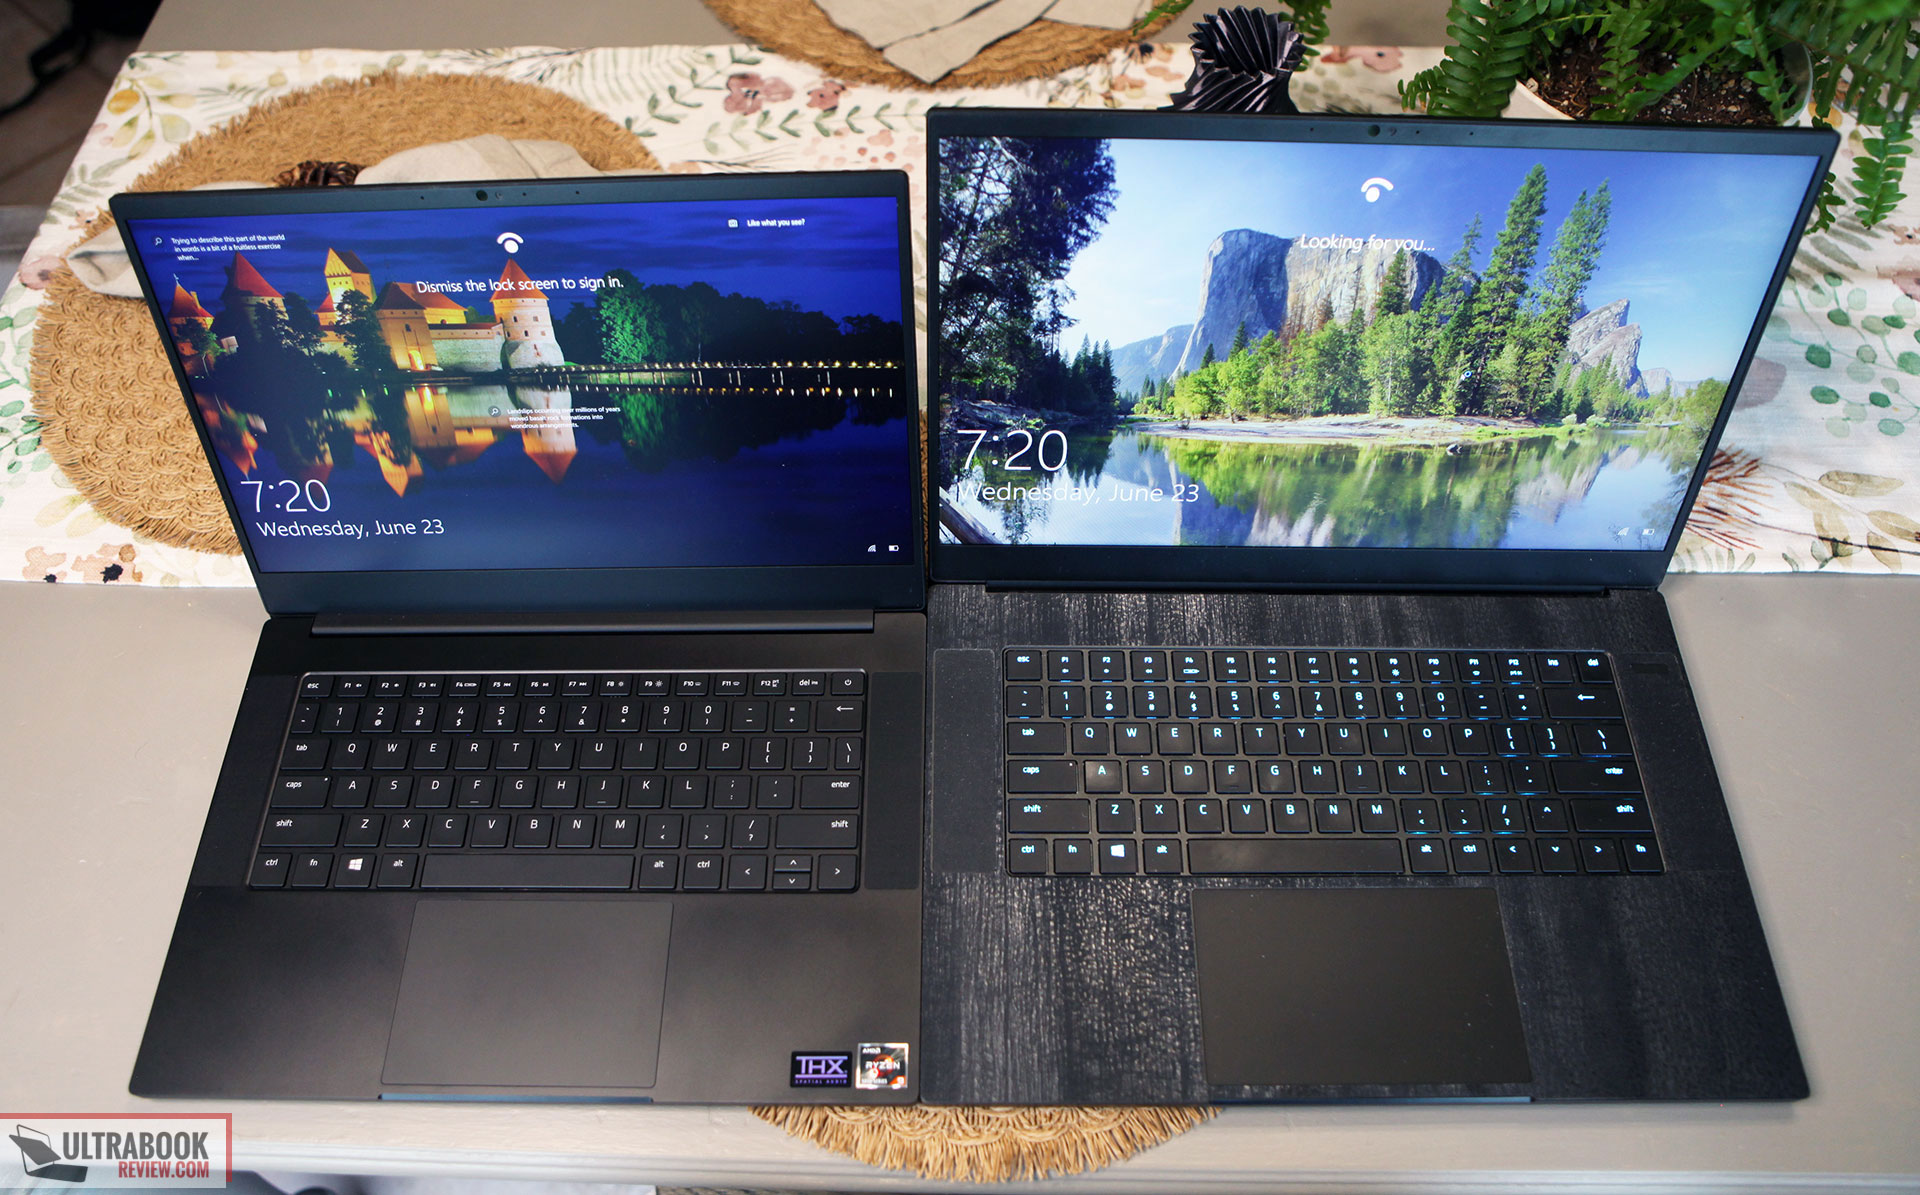 13-inch or 15-inch: How to choose the right laptop size for you